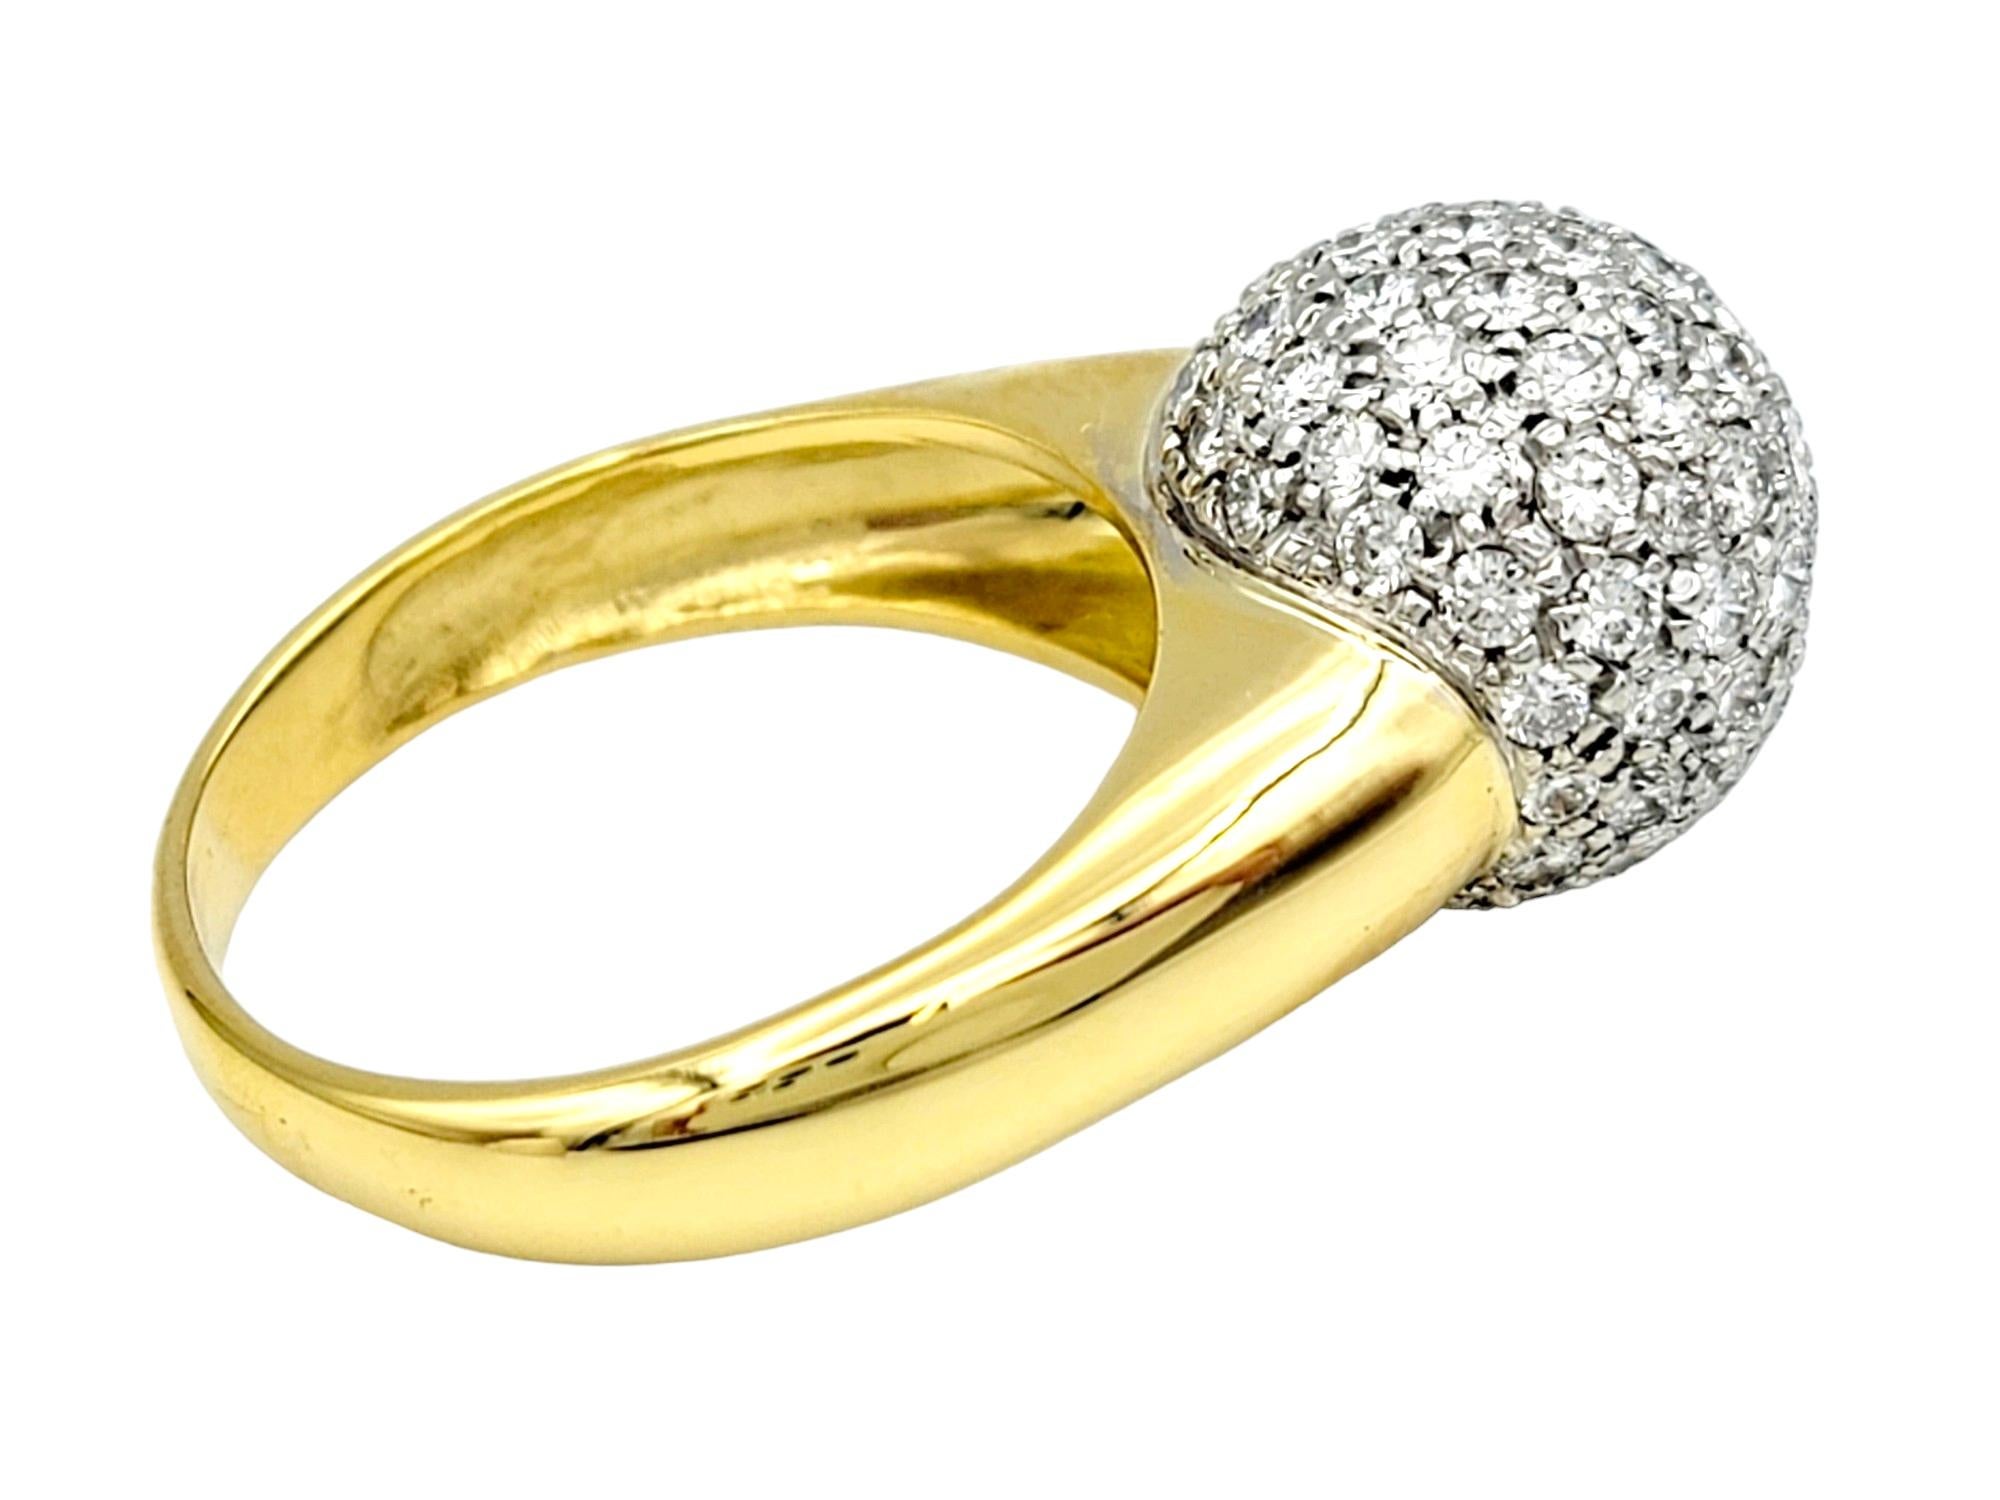 2.00 Carat Total Pave Diamond Clustered Dome Ring 18 Karat Yellow Gold, F-G / VS For Sale 1